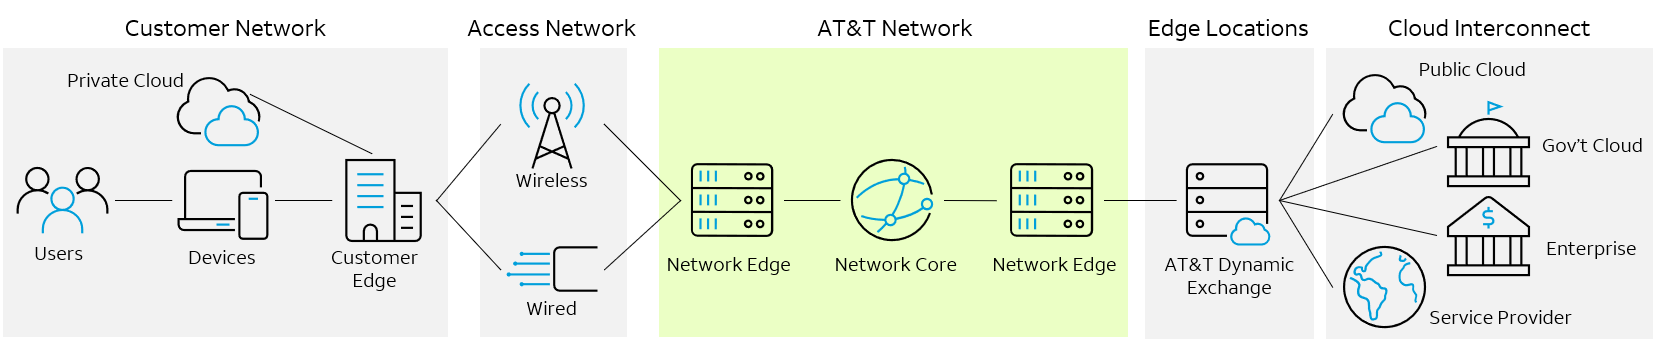 model-network-security.PNG